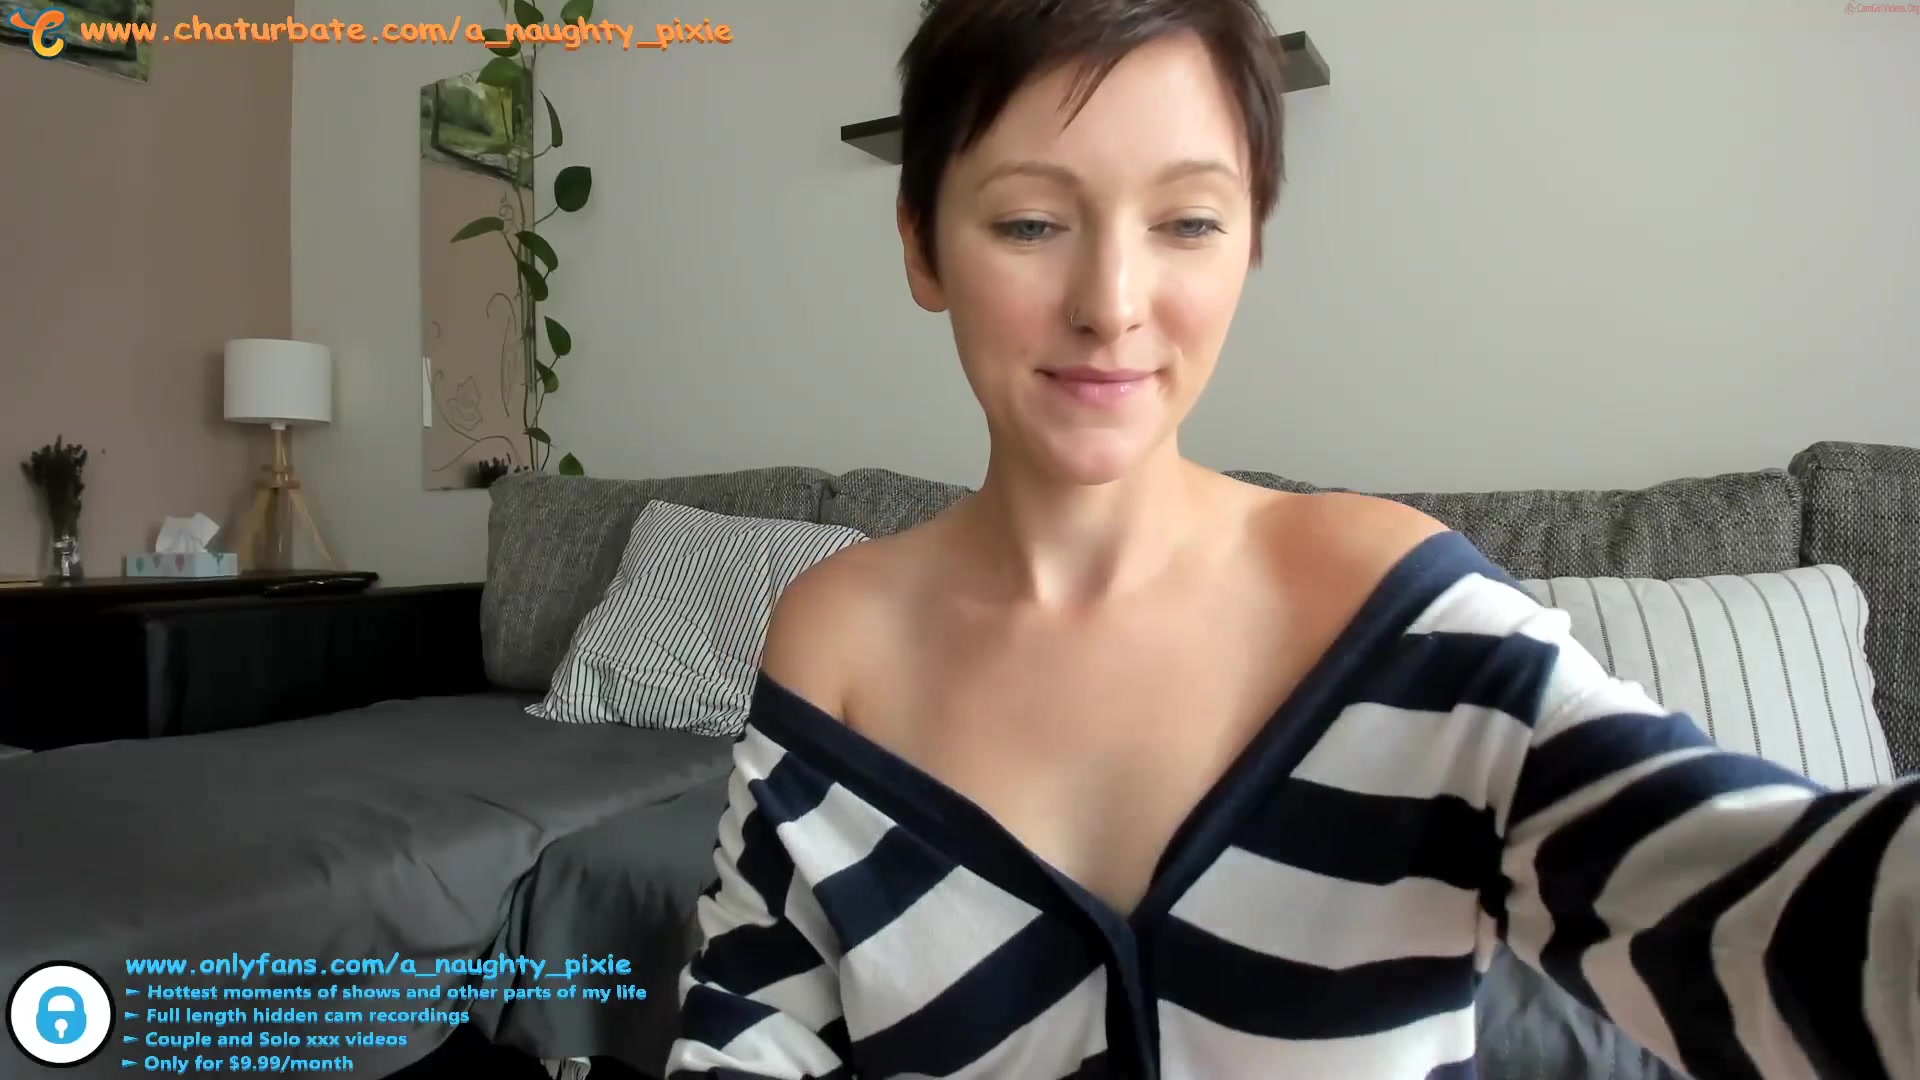 A naughty pixie chaturbate